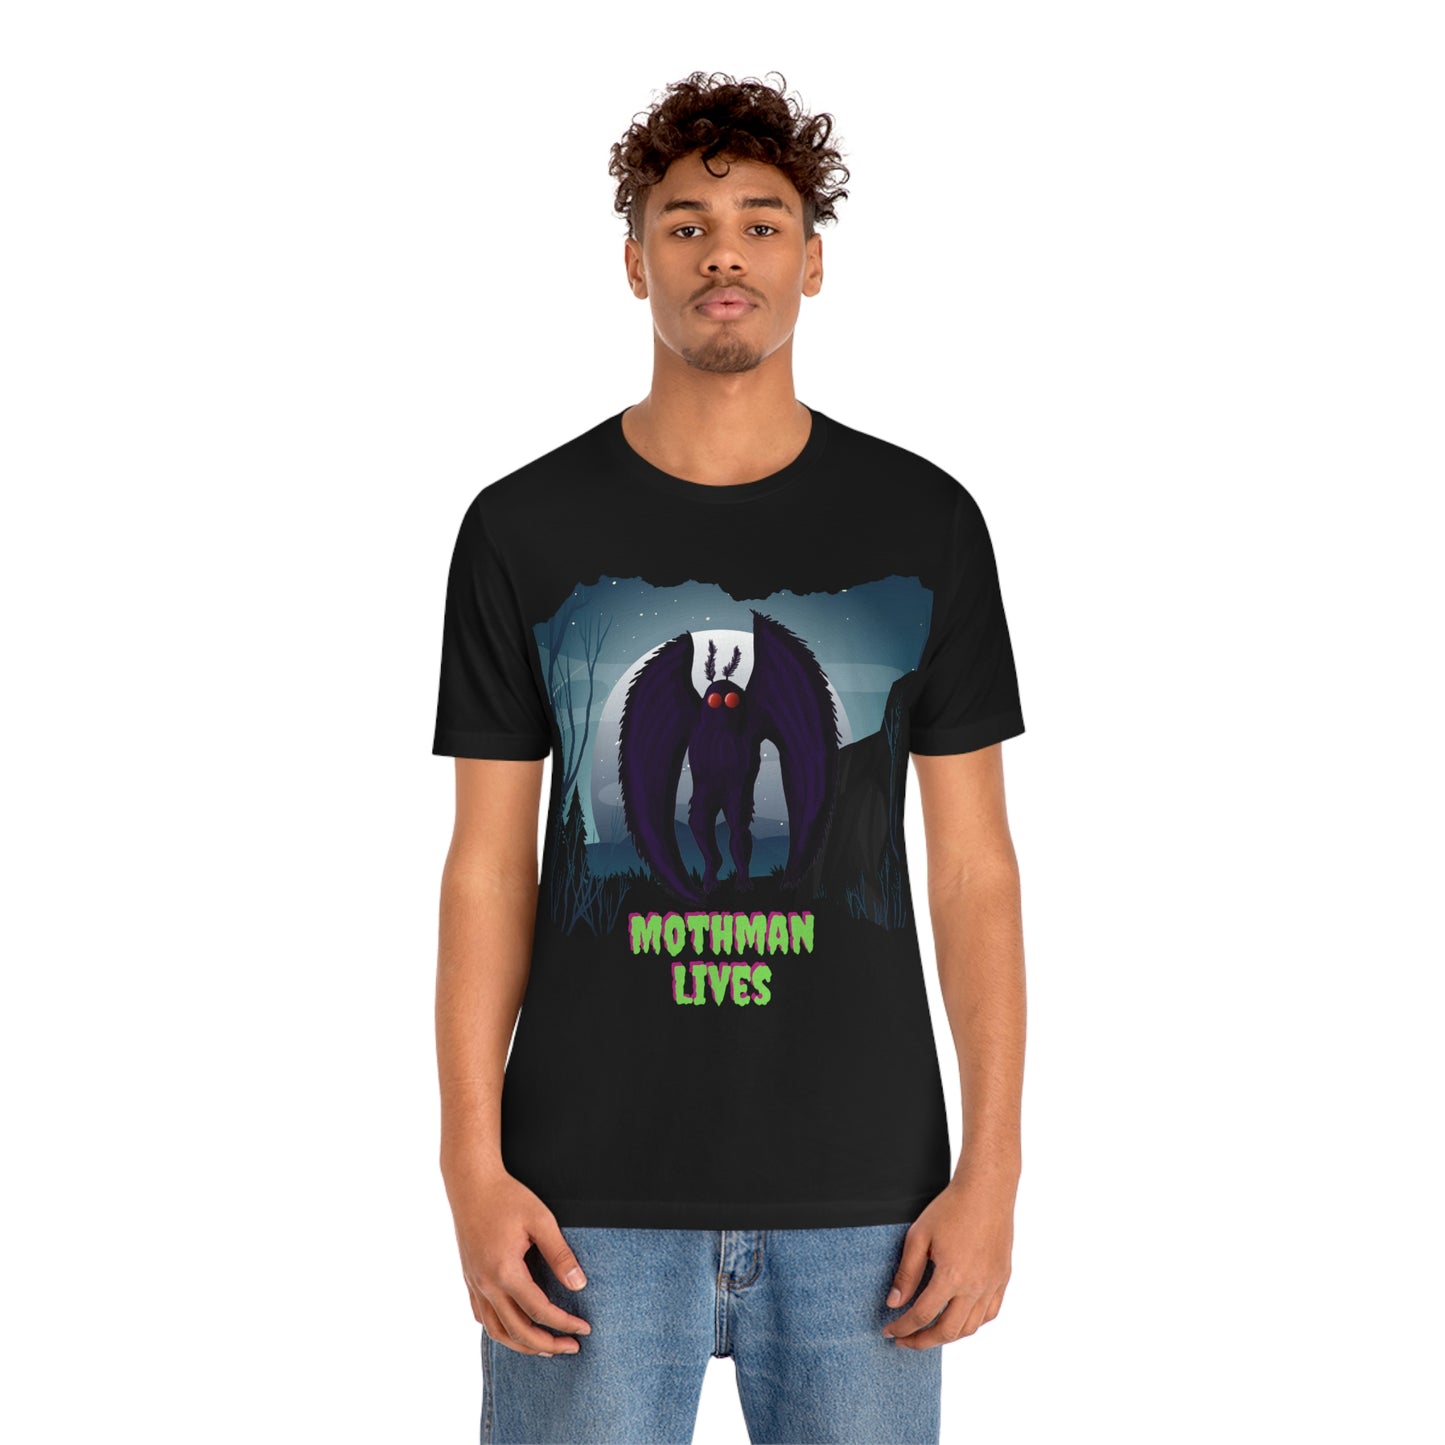 Mothman lives shirt- Awesome Cryptid Tshirt Lord and Lady Towers